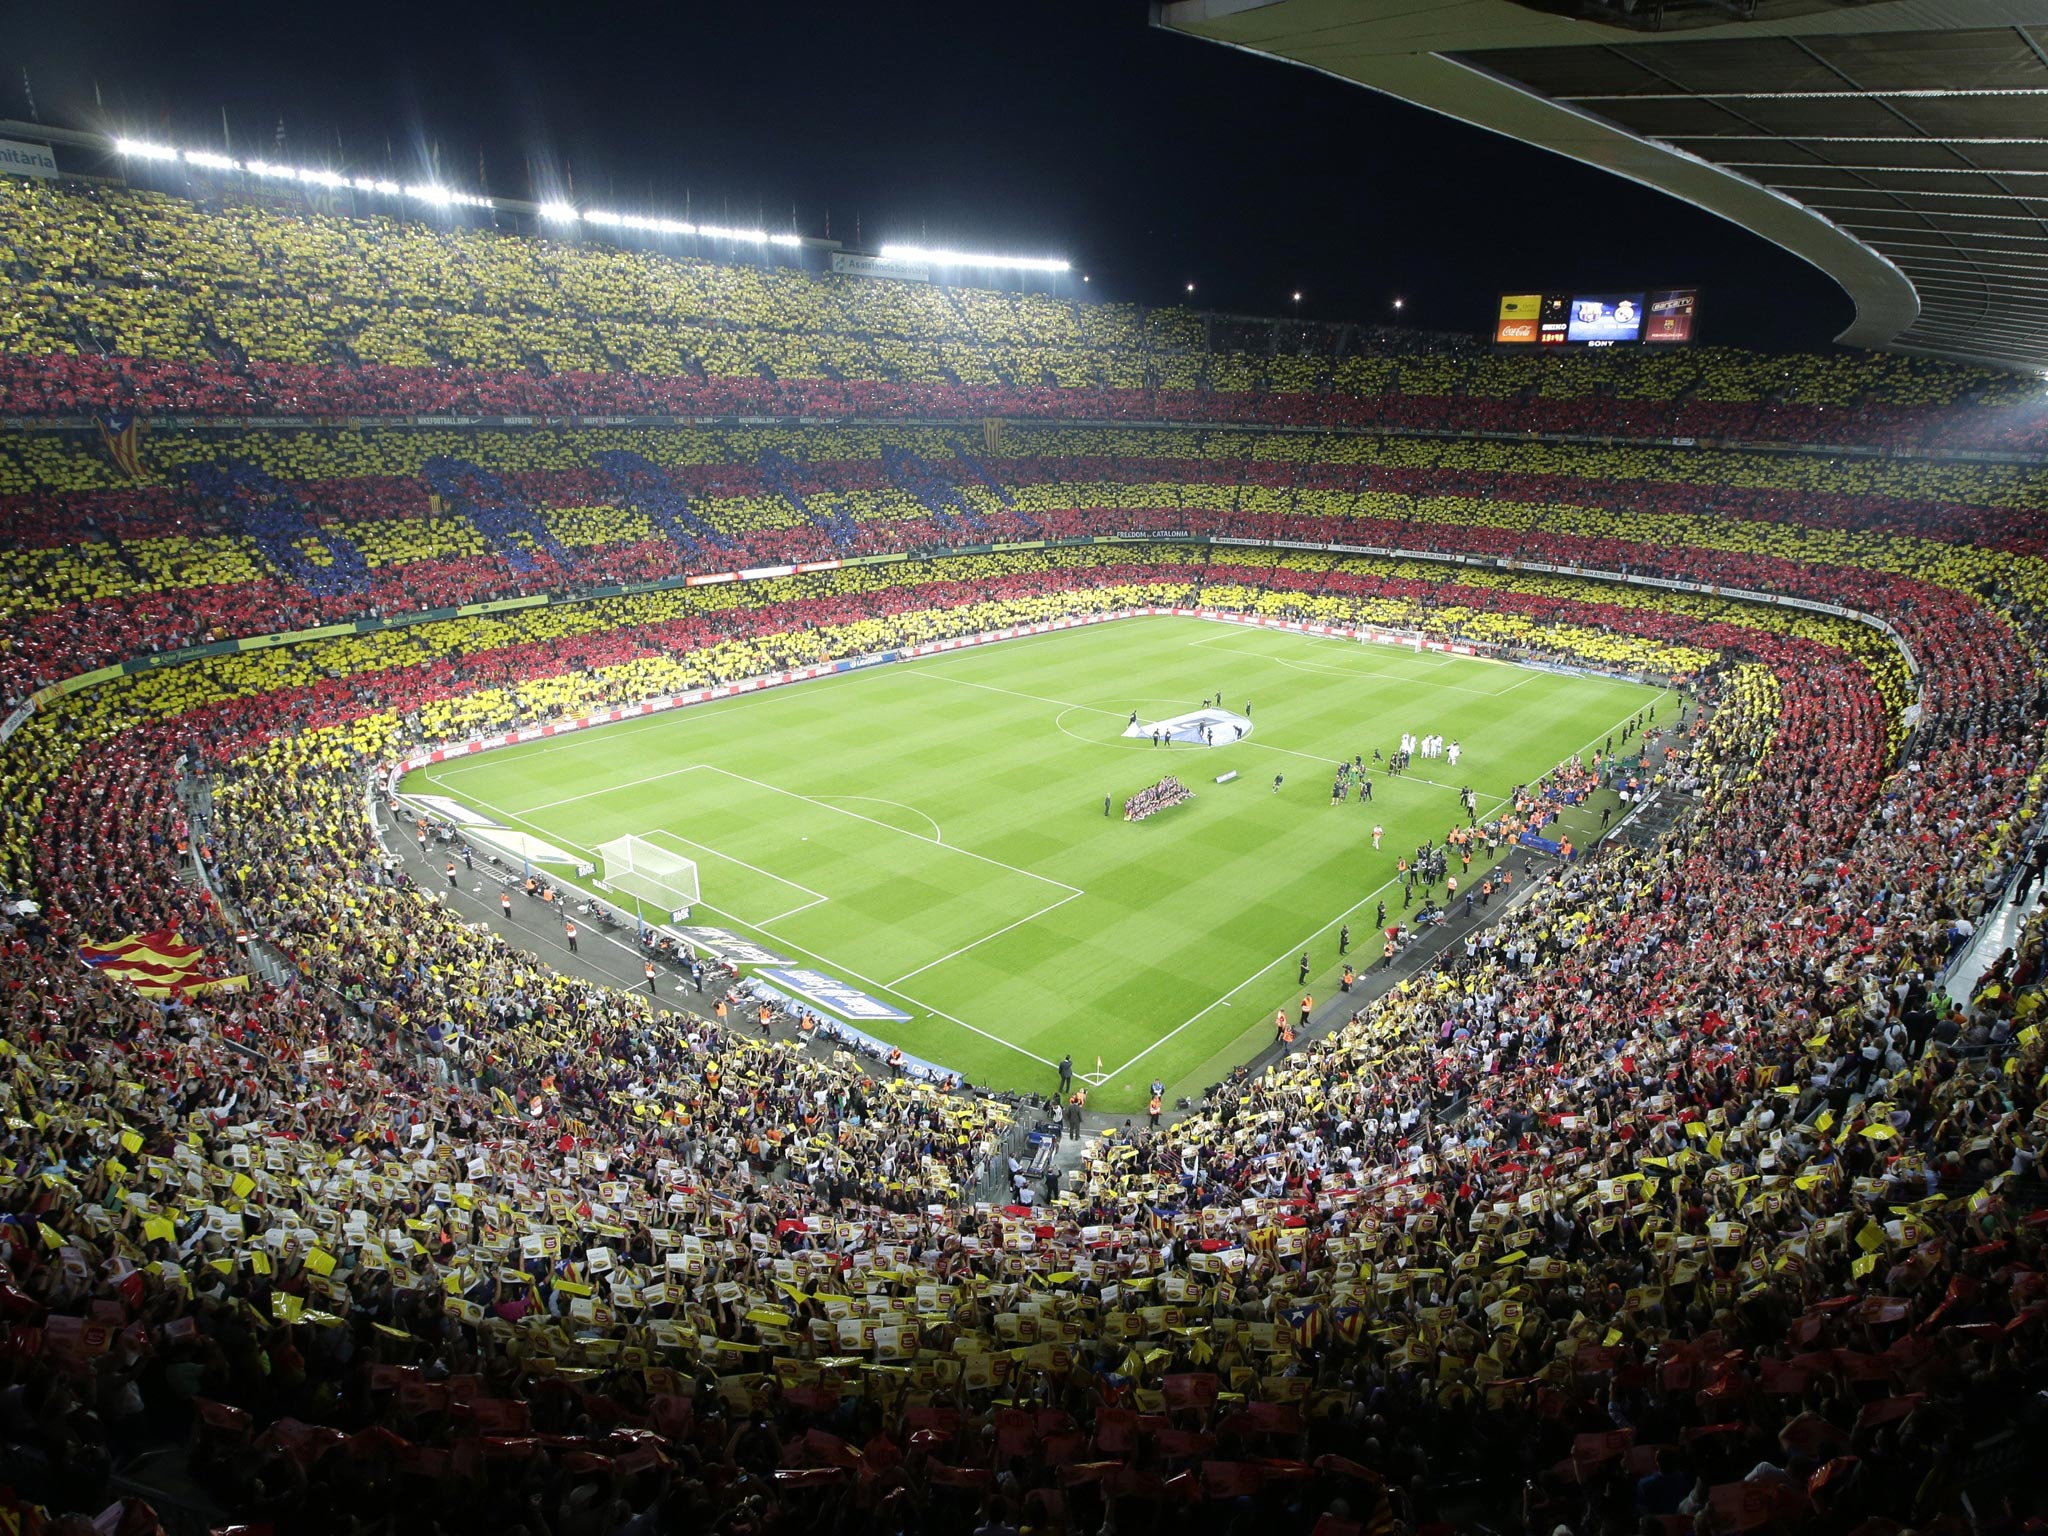 The ‘Camp Nou redo’ will increase the stadium’s income in terms of hospitality, which has been a problem in the past